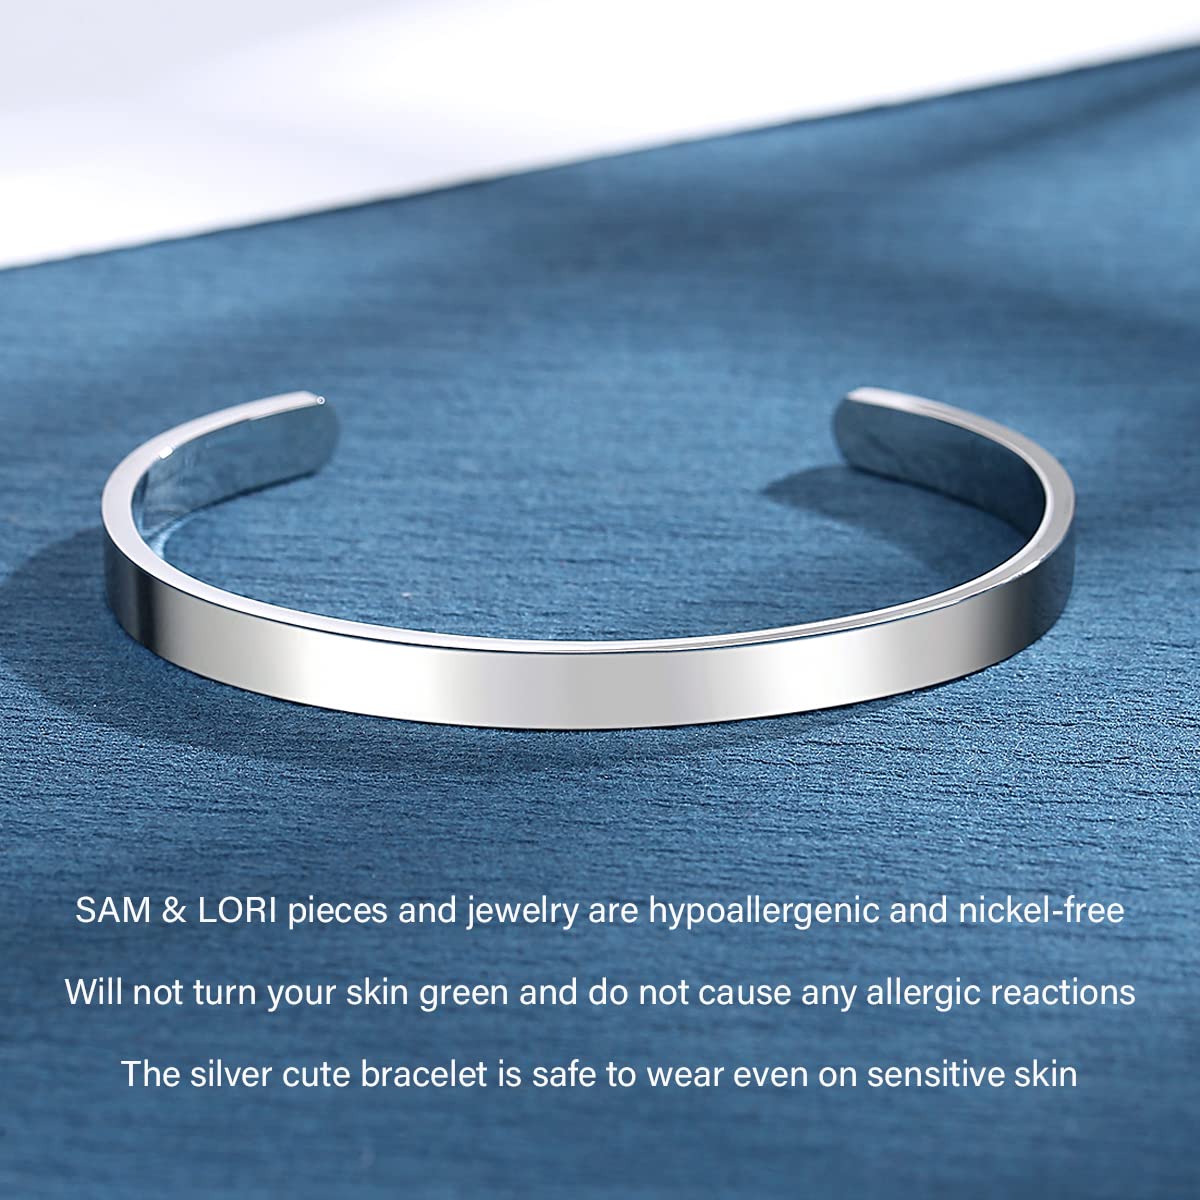 SAM & LORI Personalized Bracelets for Teen Girls/Women-Inspirational Jewelry Gifts (Various Designs) for Daughter/Sister/Mom/Friends-Adjustable Bracelet in a Pretty Gift Box